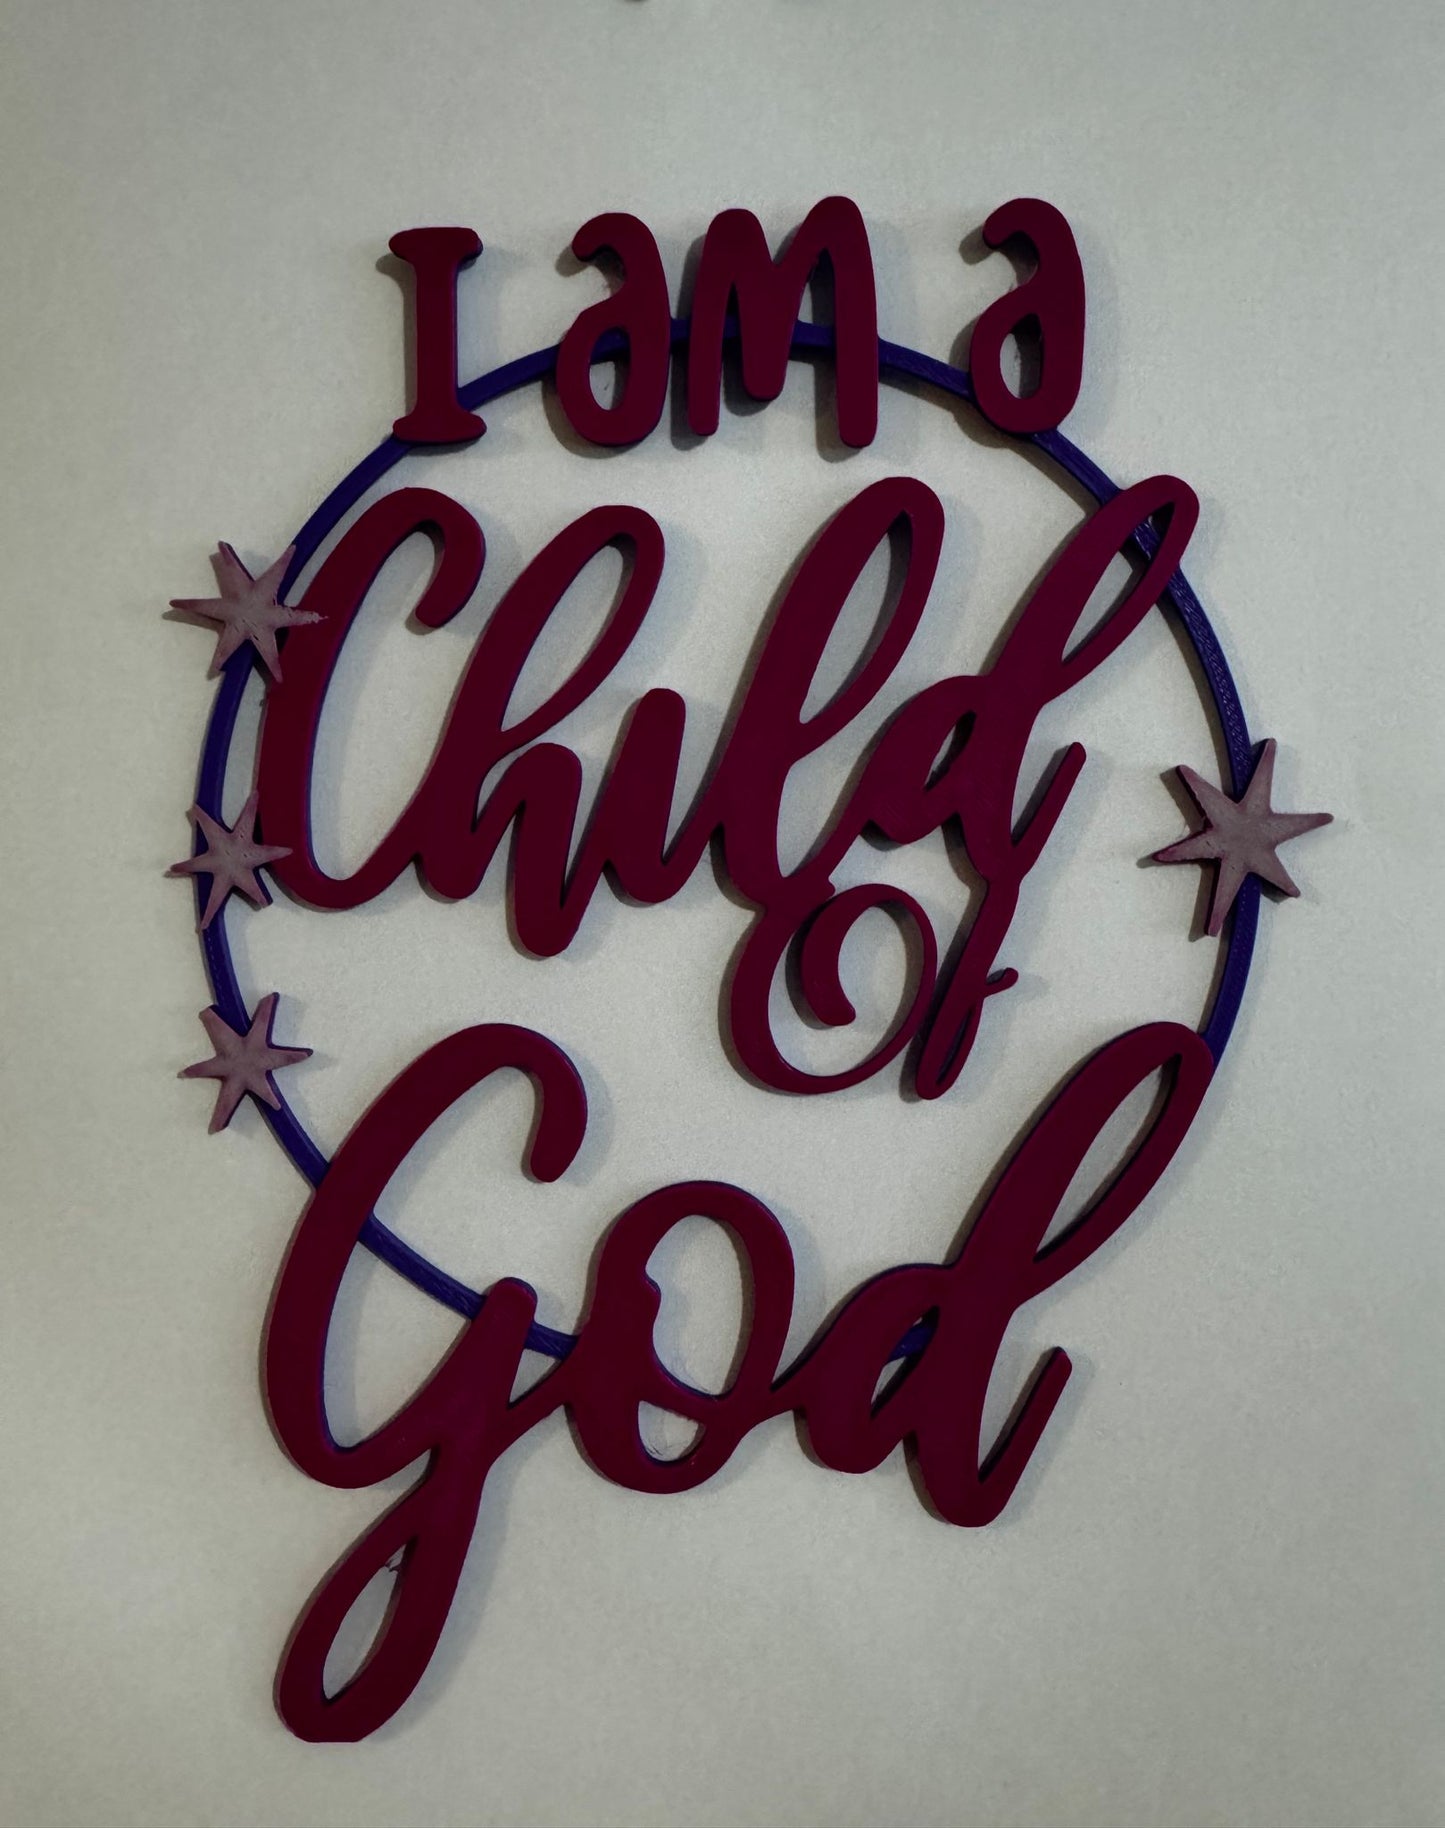 I am a Child of G-d